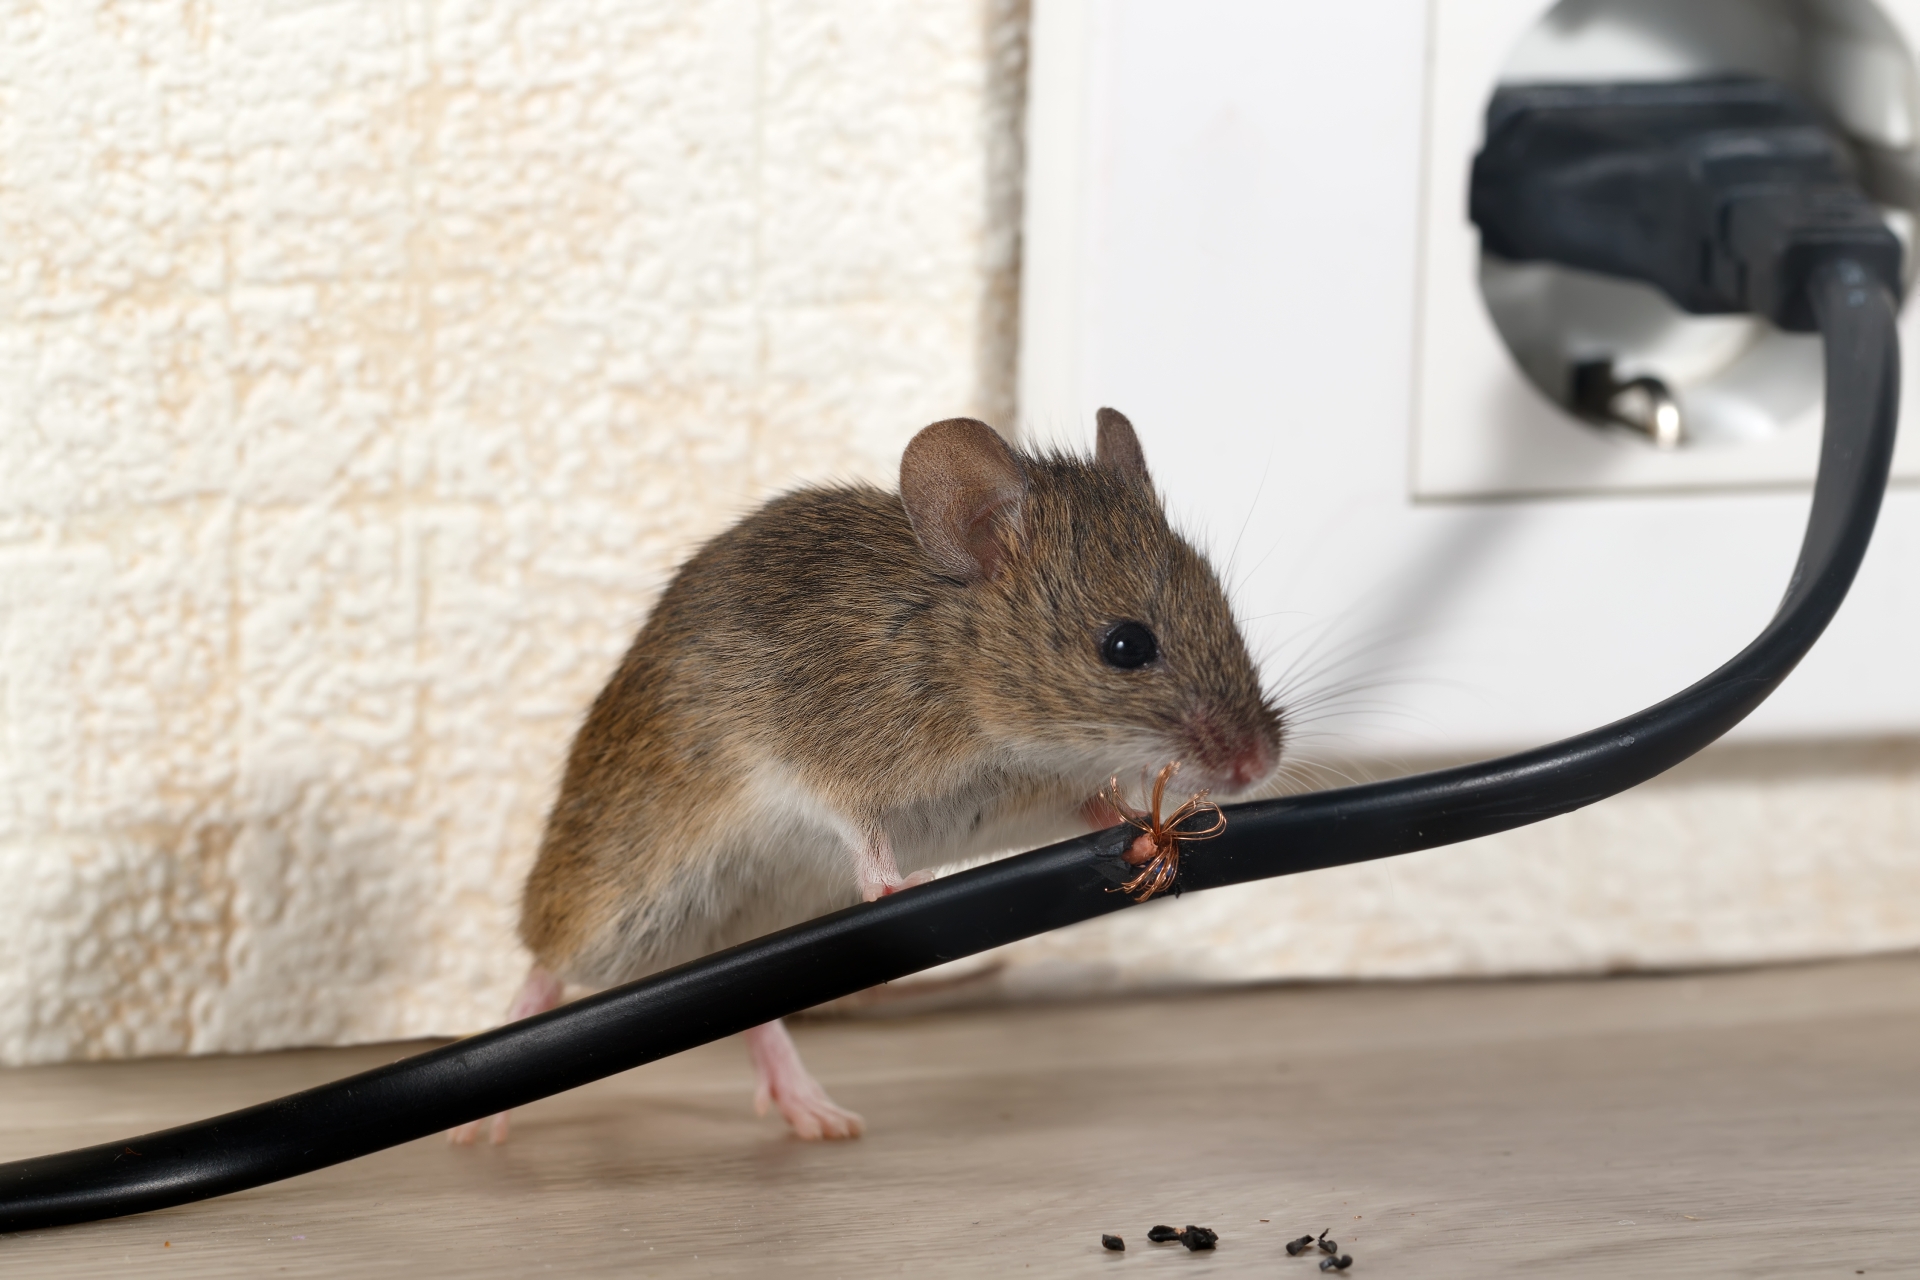 Mice Infestation, Pest Control in South Norwood, SE25. Call Now 020 8166 9746